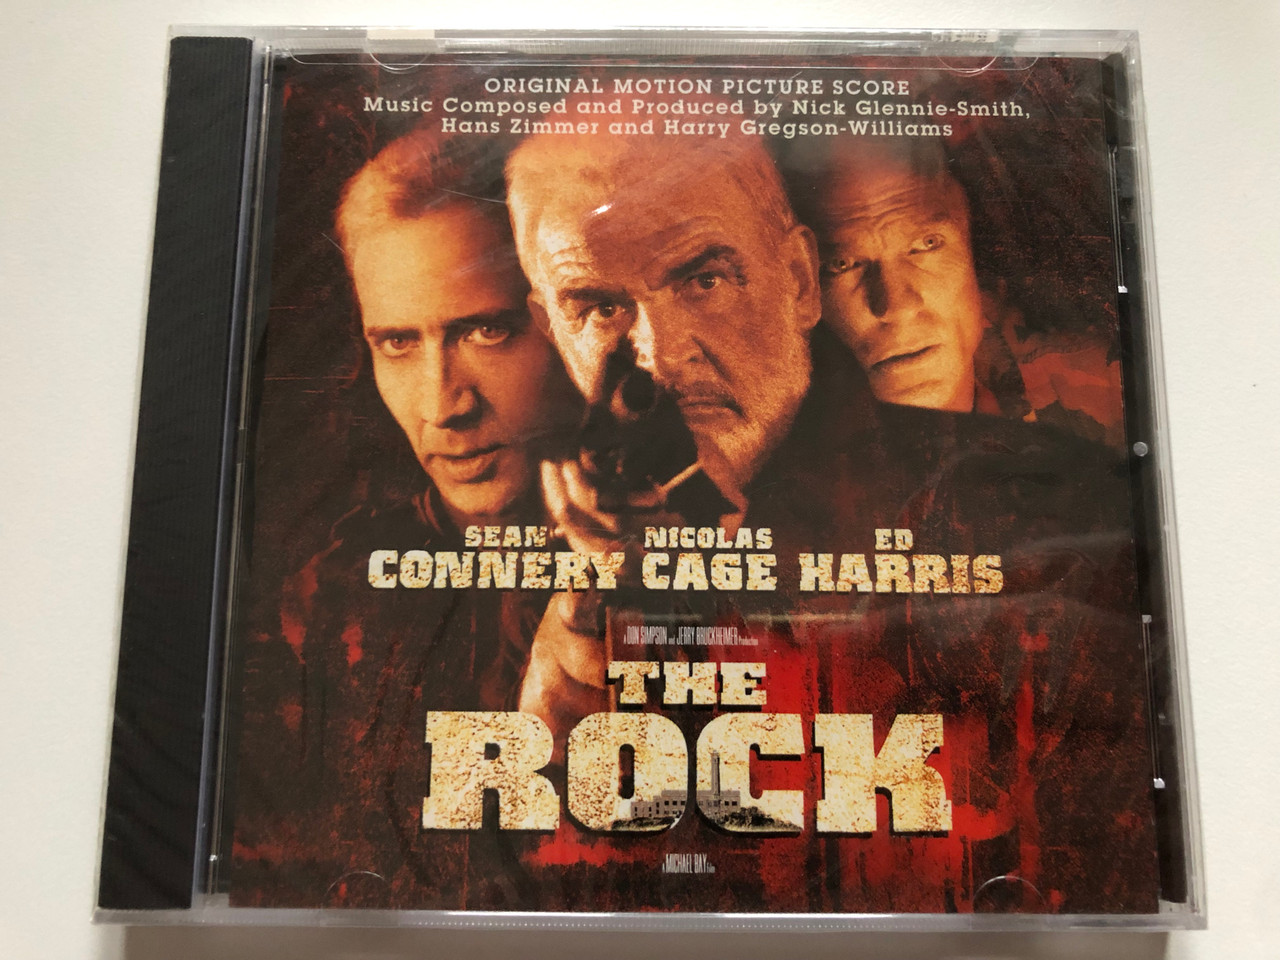 https://cdn10.bigcommerce.com/s-62bdpkt7pb/products/0/images/220652/The_Rock_Original_Motion_Picture_Score_-_Sean_Connery_Nicolas_Cage_Ed_Harris_Music_Composed_and_Produced_by_Nick_Glennie-Smith_Hans_Zimmer_and_Harry_Gregson-Williams_Hollywood_Records_A_1__18132.1649169442.1280.1280.JPG?c=2&_gl=1*ct8mva*_ga*MjA2NTIxMjE2MC4xNTkwNTEyNTMy*_ga_WS2VZYPC6G*MTY0OTE2ODI5OS4zNDMuMS4xNjQ5MTY4OTYwLjQx